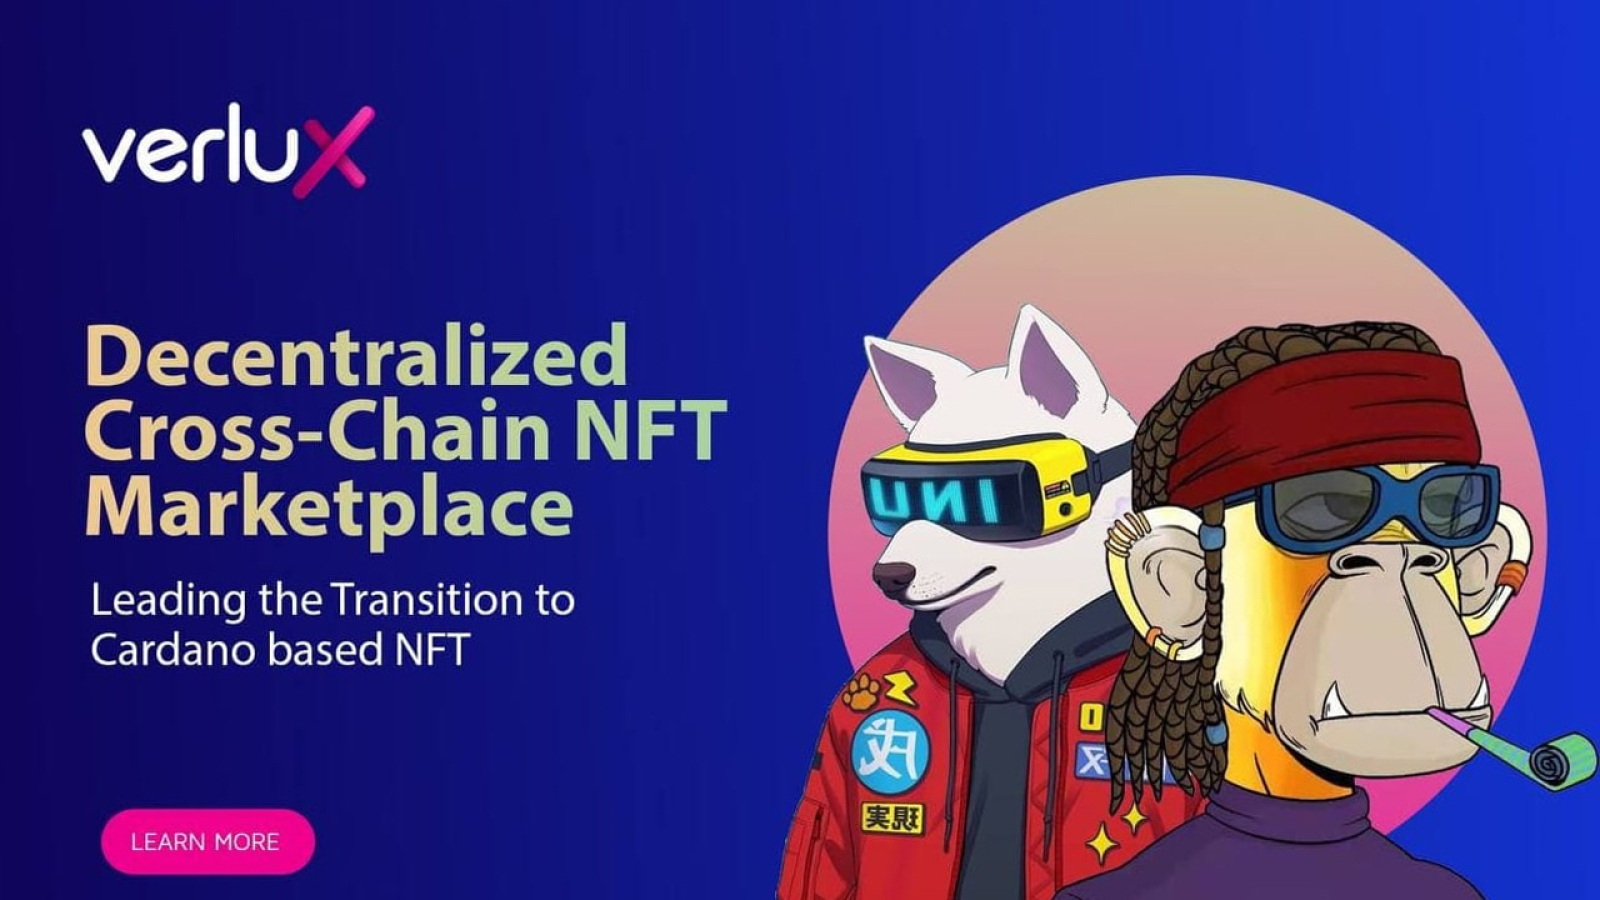 Cardano Based Cross-Chain NFT Marketplace, Verlux fills over 35% of its Pre-Sale Allocation Rapidly